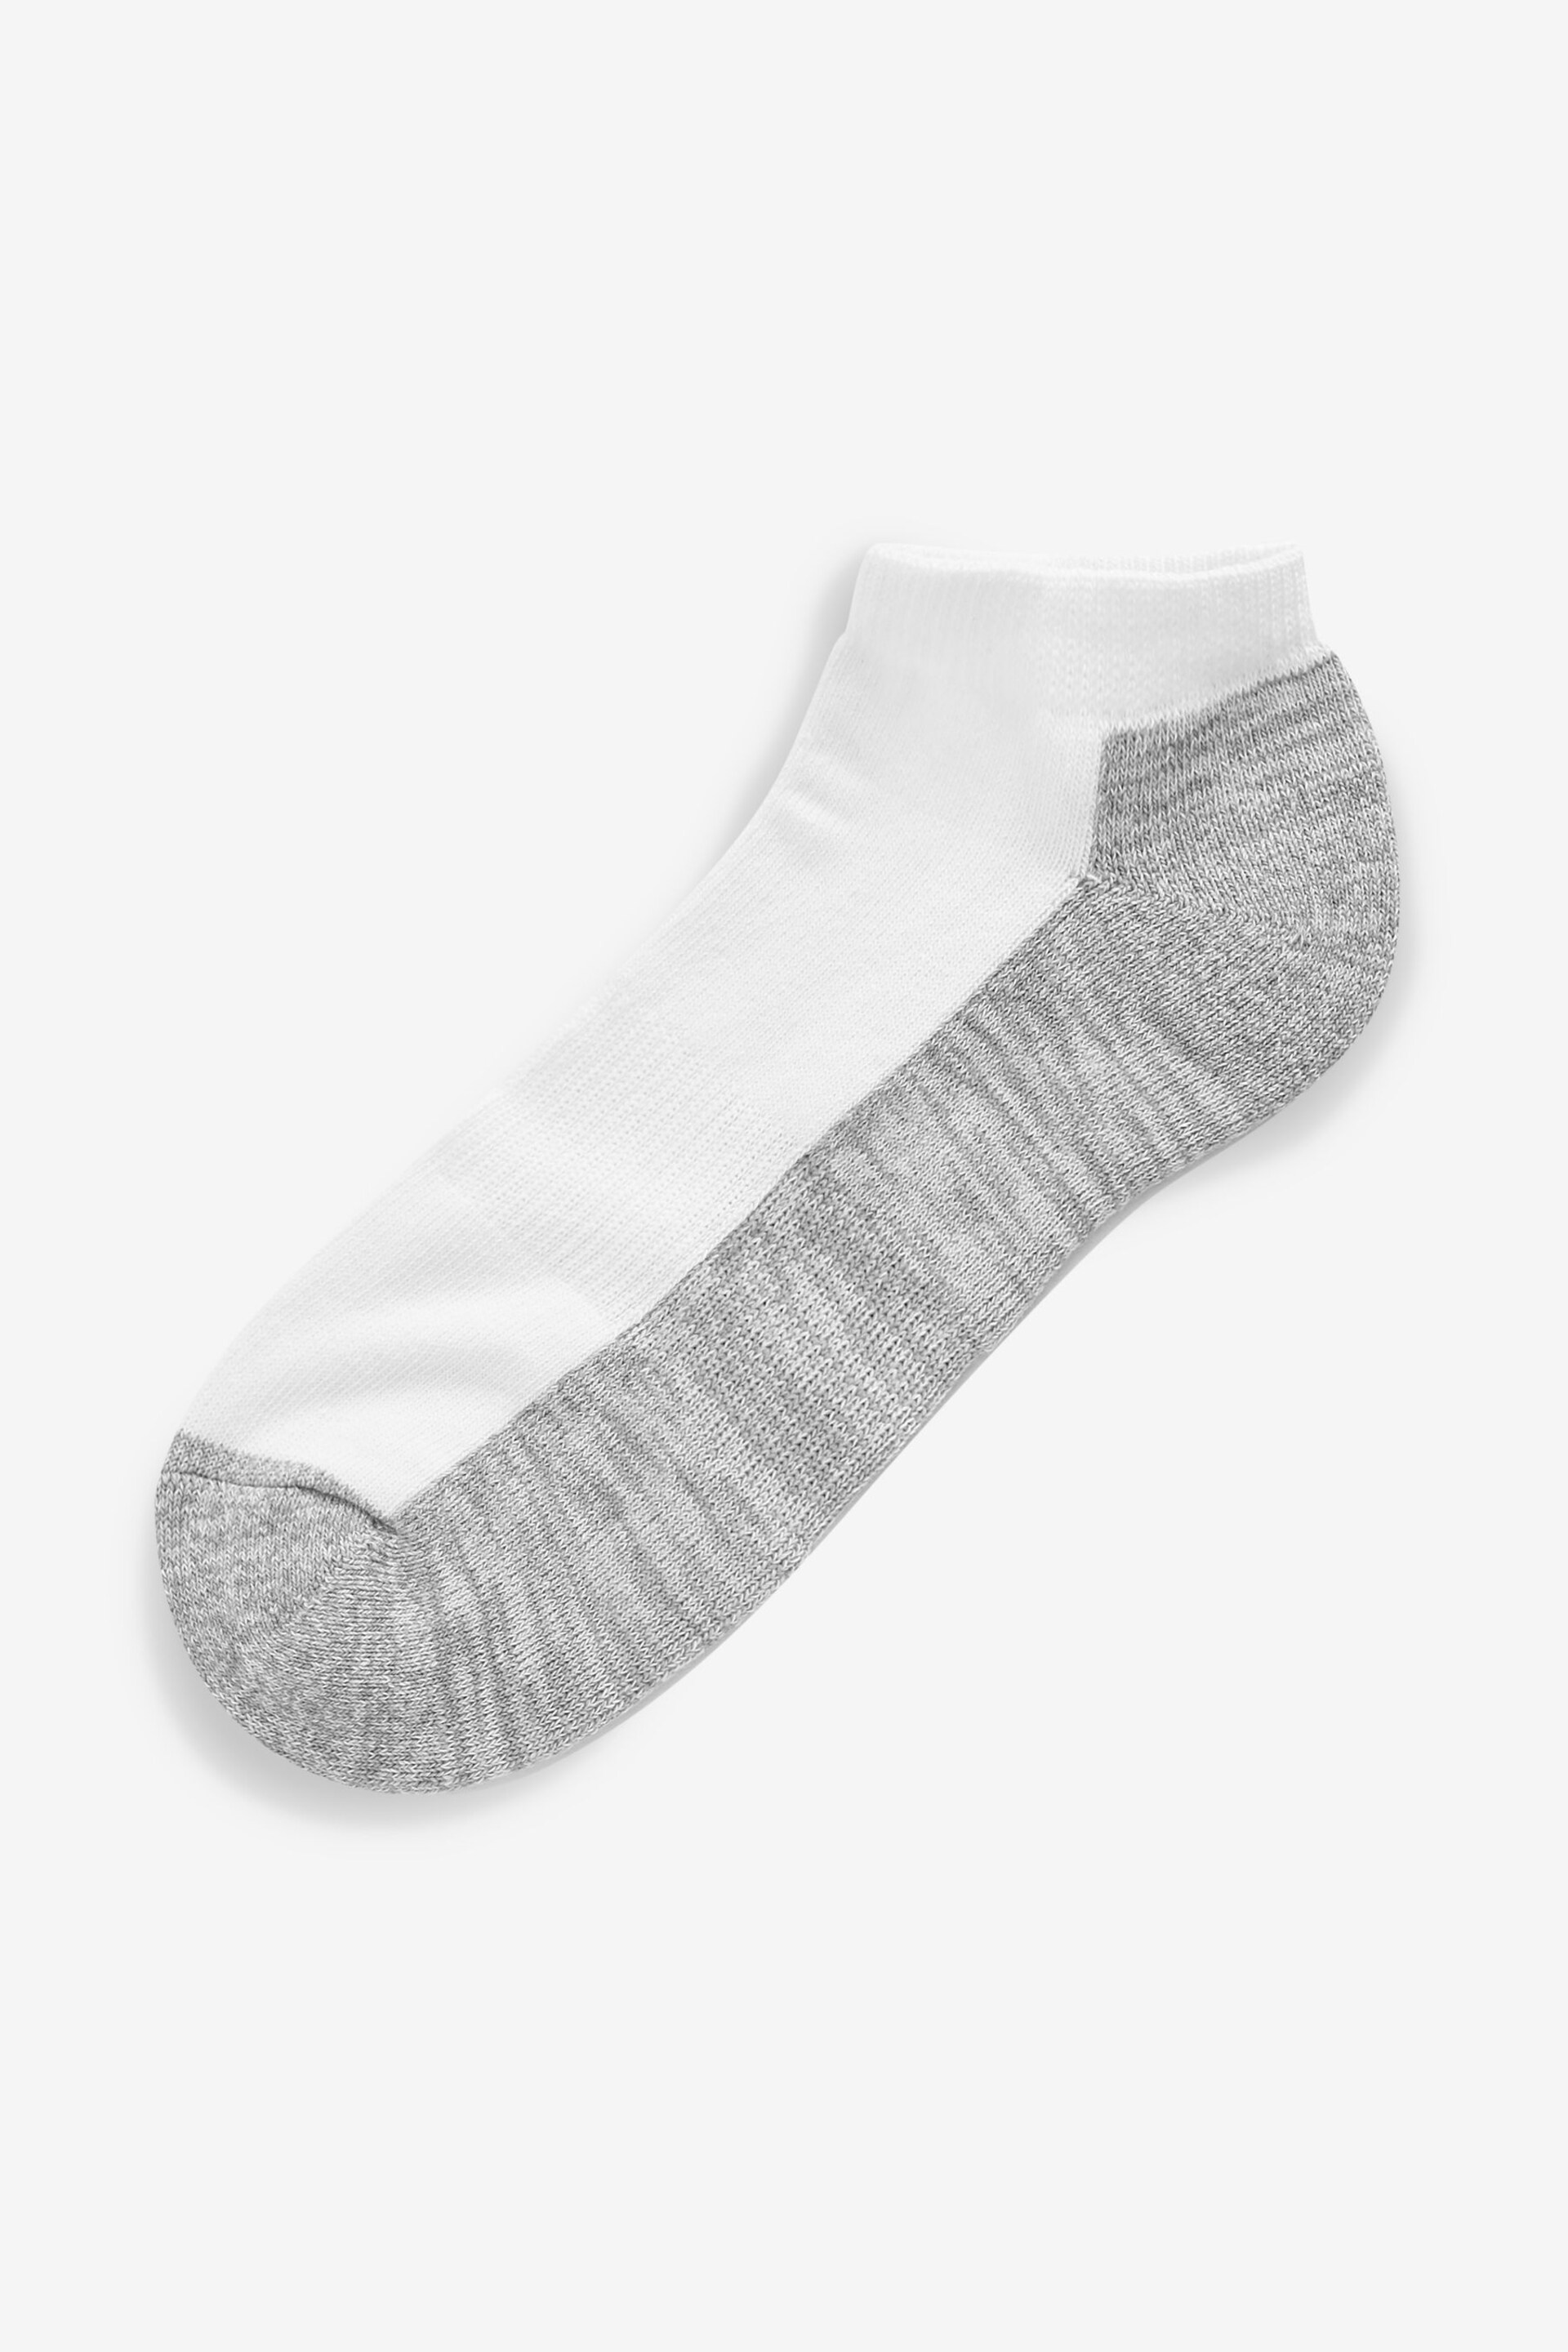 White/Grey 10 Pack Cushioned Trainers Socks - Image 6 of 6